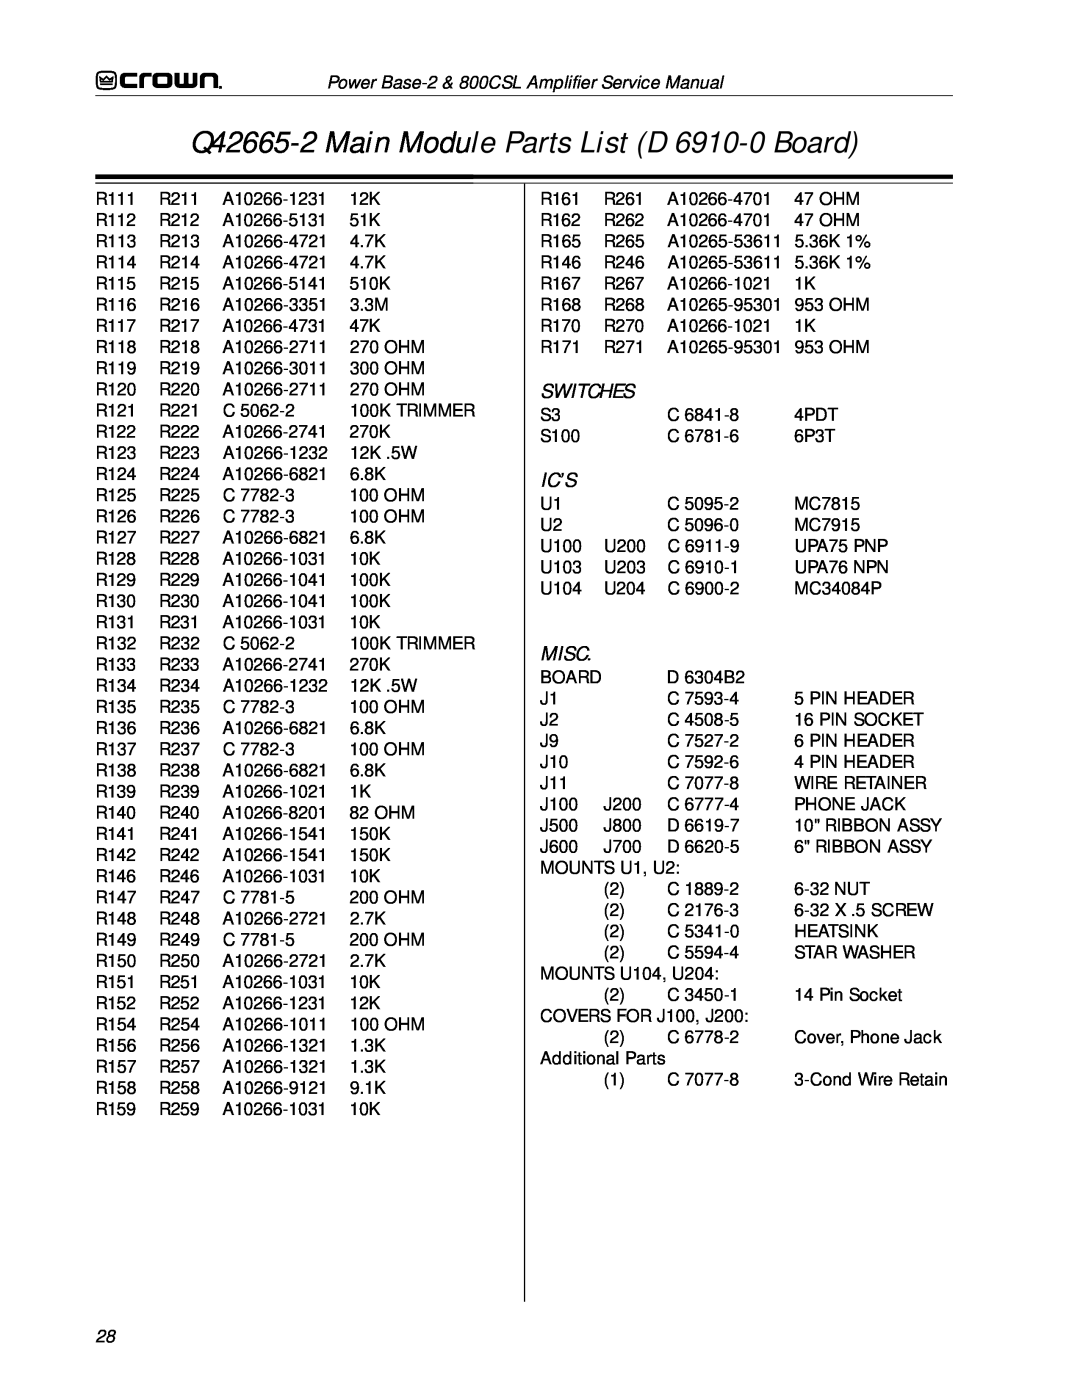 Crown Audio 800CSL service manual Switches, Ic’S, Q42665-2Main Module Parts List D 6910-0Board, Misc 